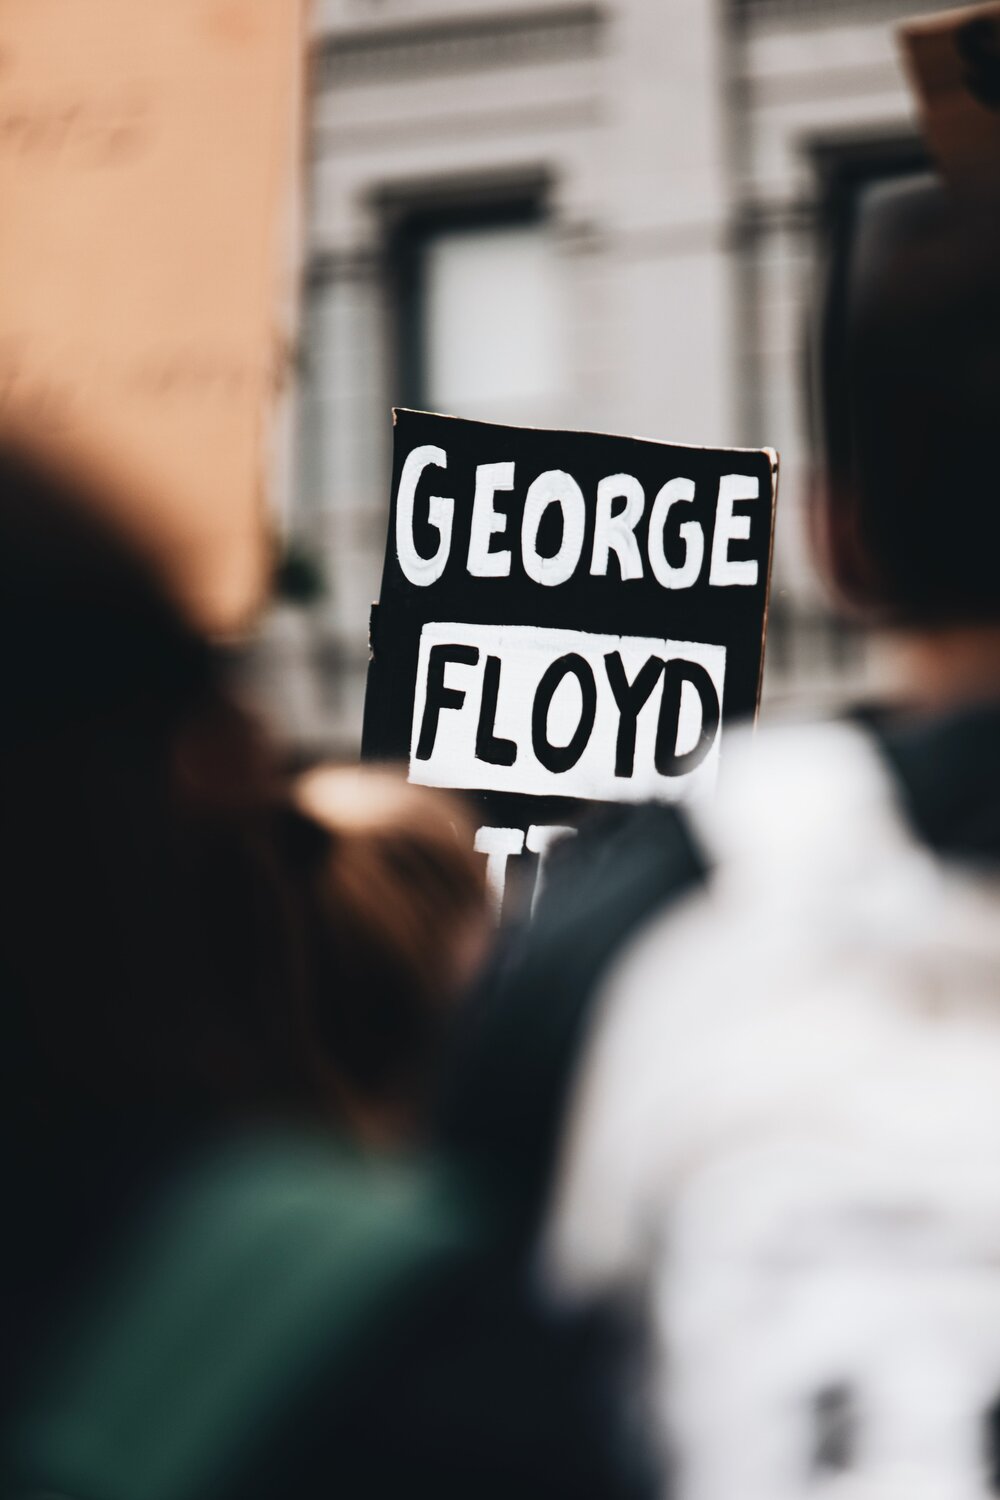 Focus on one protester's sign, the visable part of which reads 'George Floyd'. Photo: Logan Weaver/Unsplash